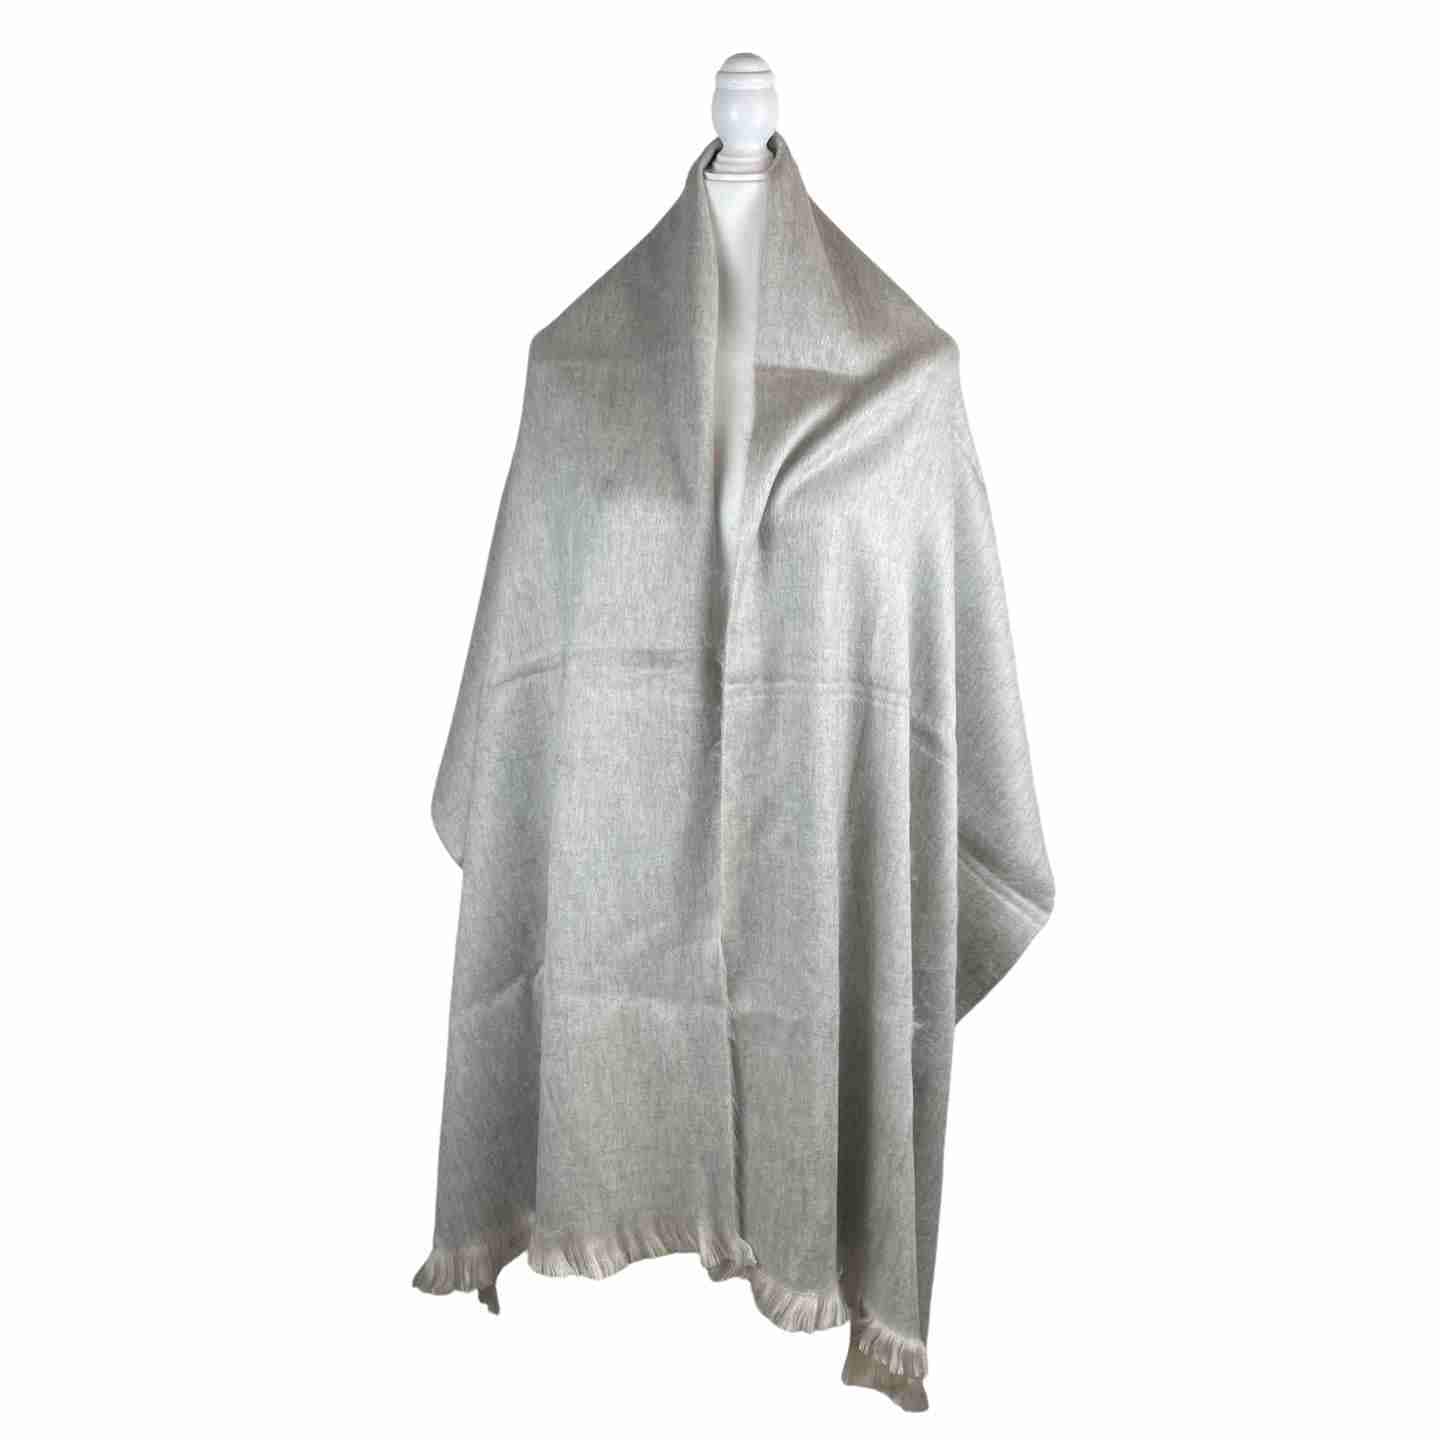 Cozy Soft Wrap Shawl for Wedding | Bridal Cover Up | Light Silver